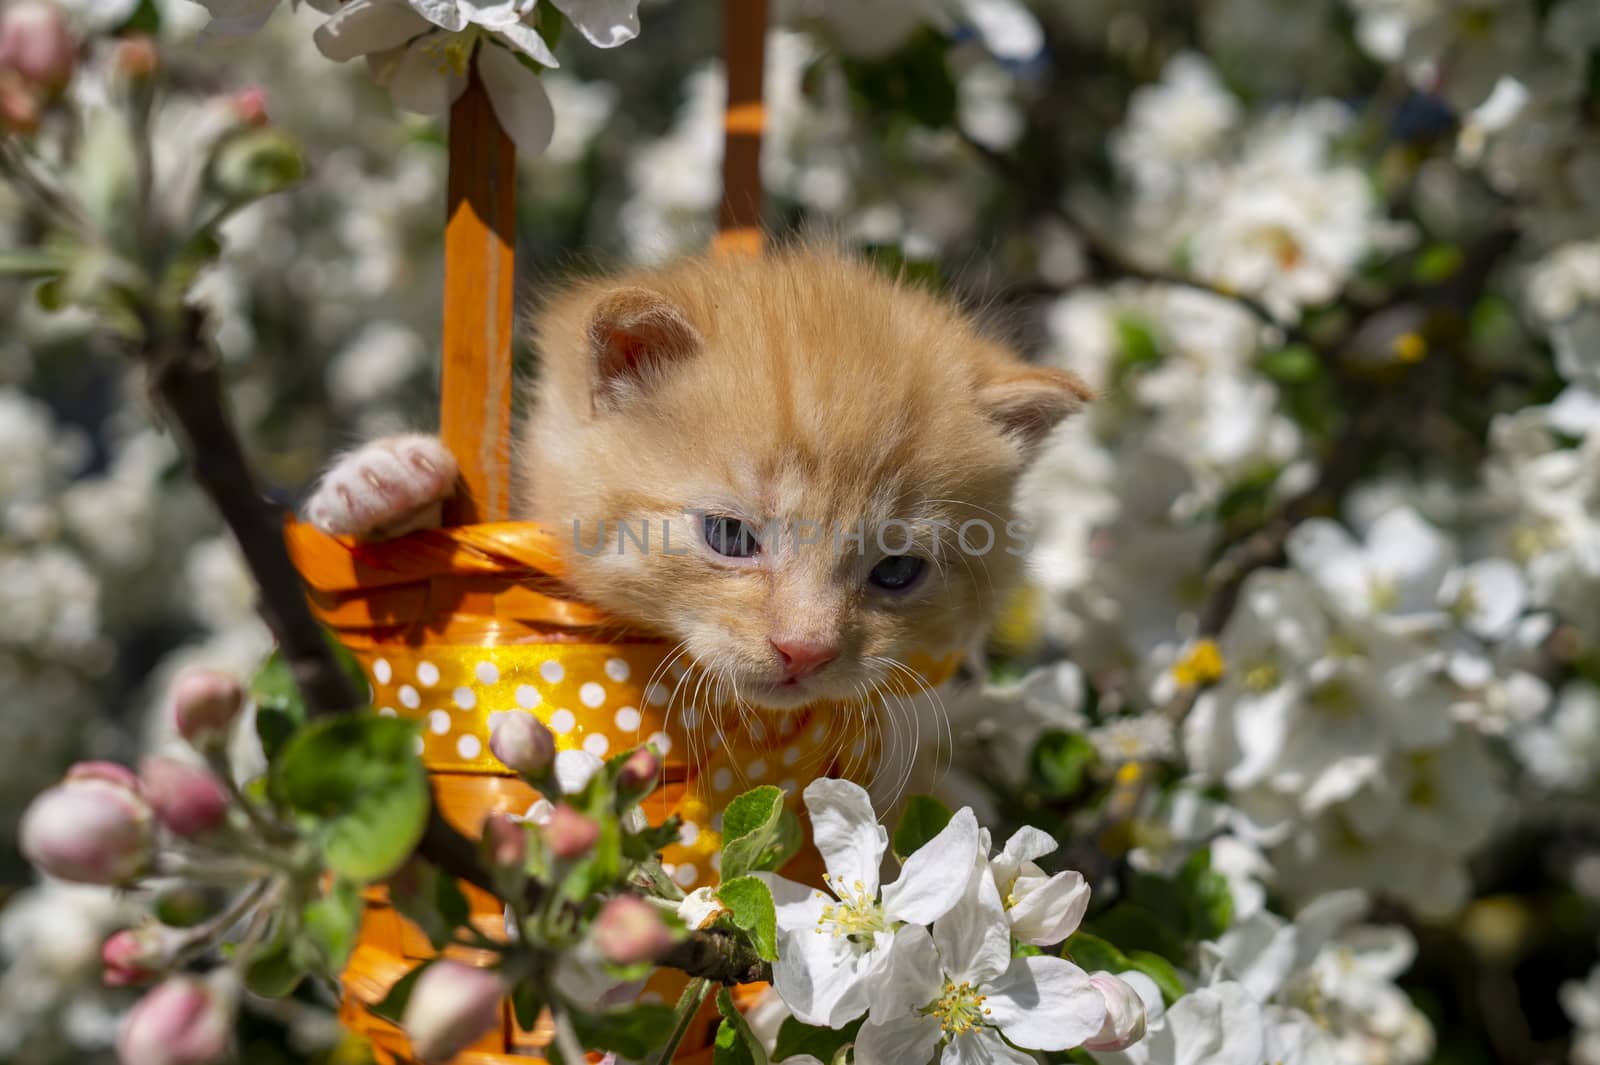 Little ginger kitten in a gift basket with orange ribbon with white polka dots outdoors in a spring garden amongst white flowers